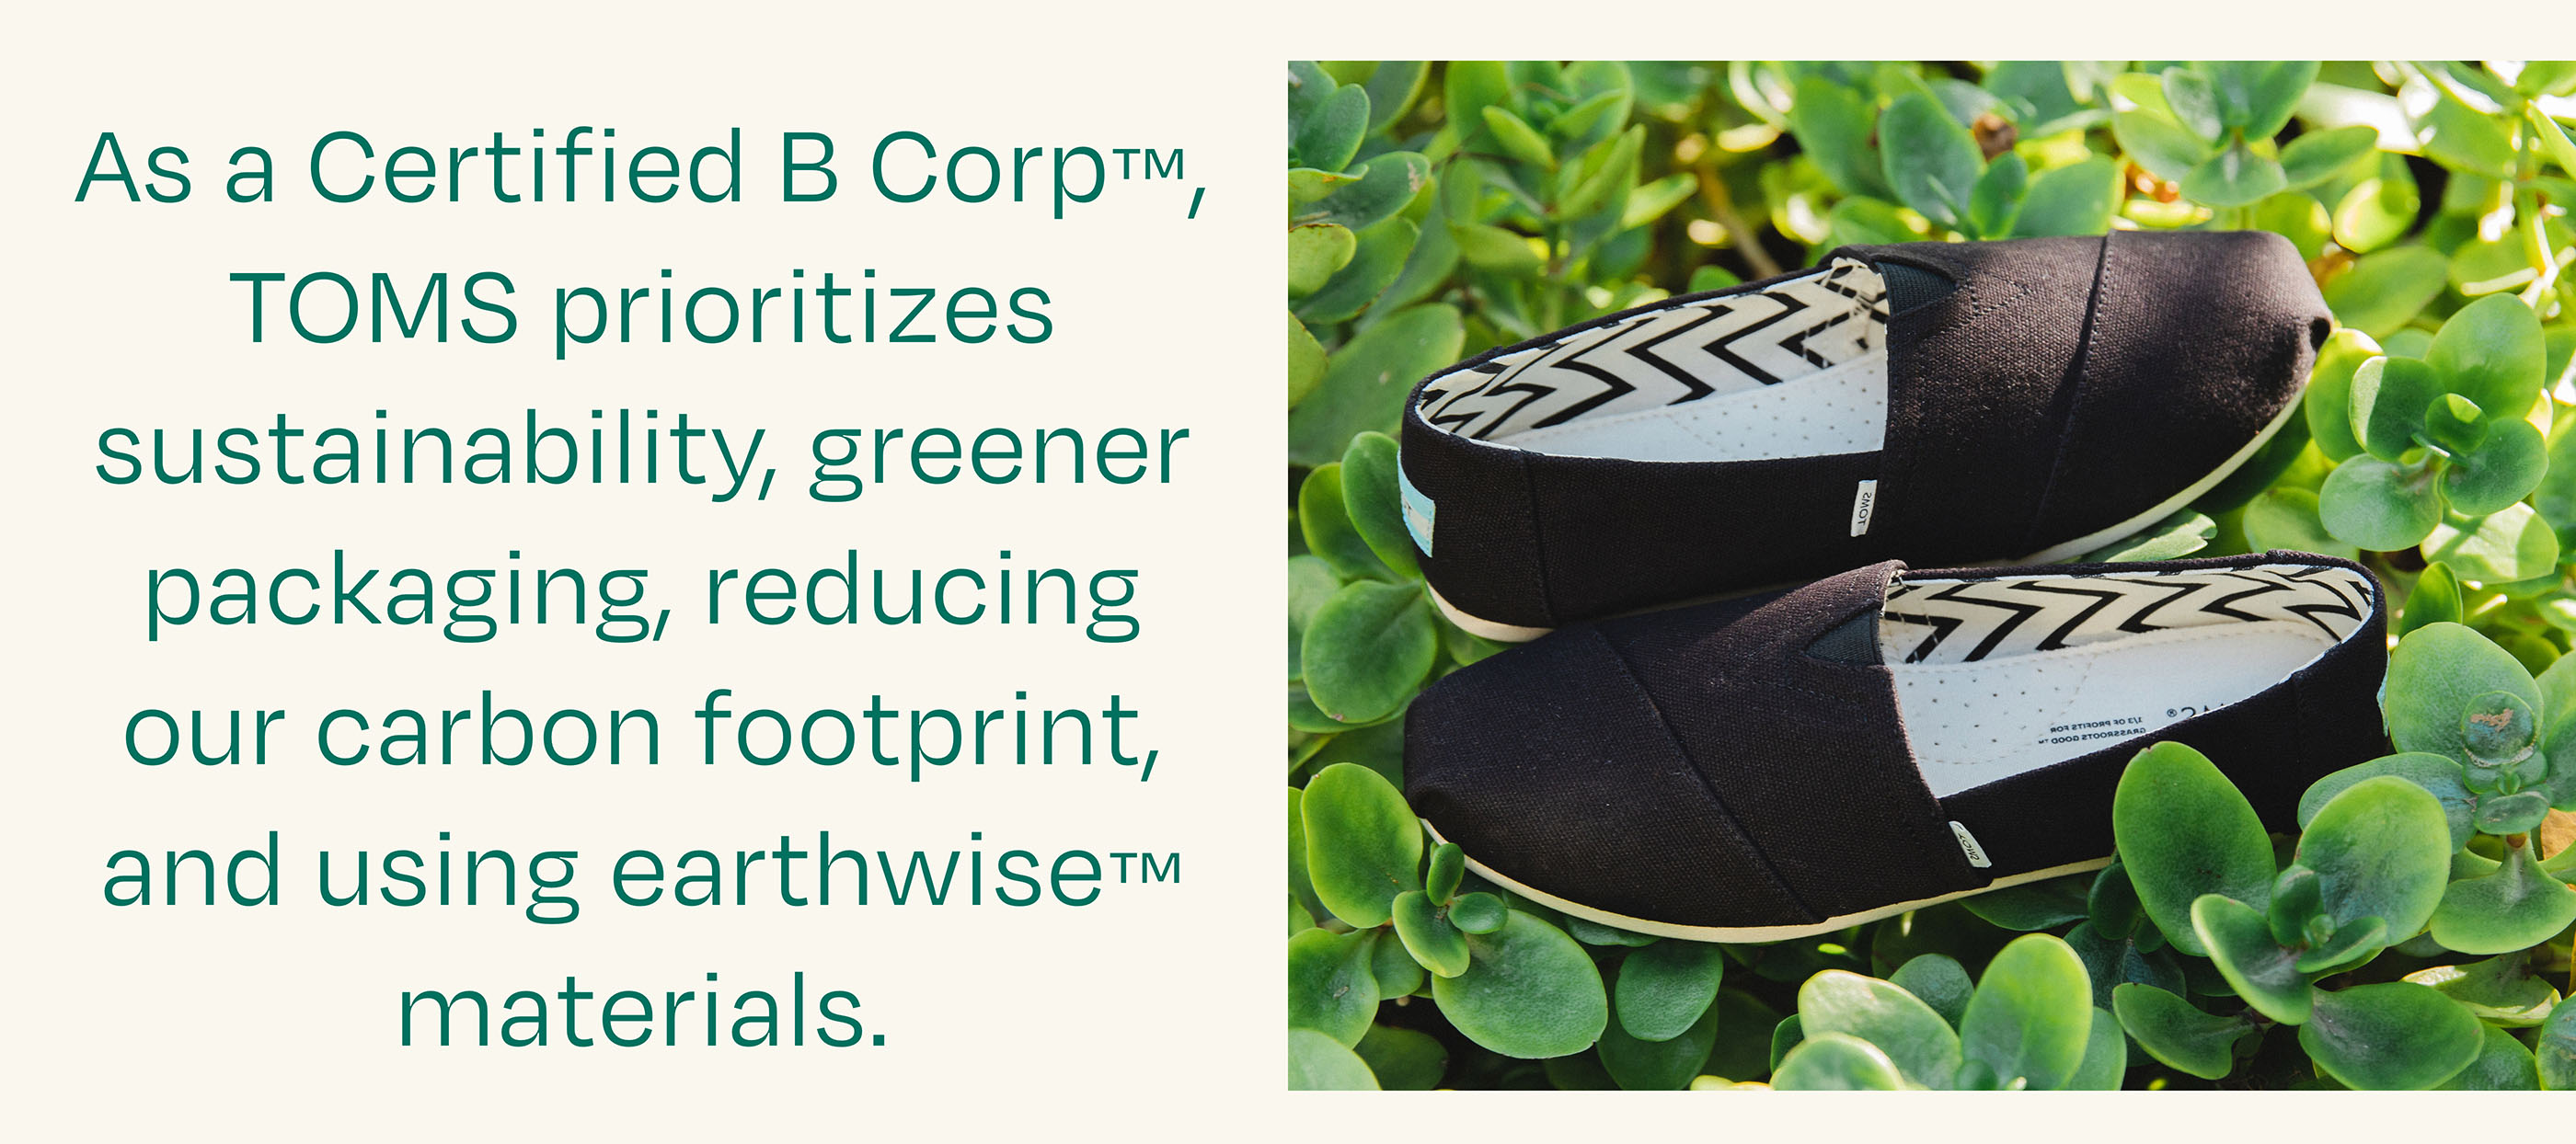 As a Certified B Corp™, TOMS prioritizes sustainability, greener packaging, reducing our carbon footprint, and using earthwise™ materials. The Alpargata in Black Recycled Cotton Canvas shown.